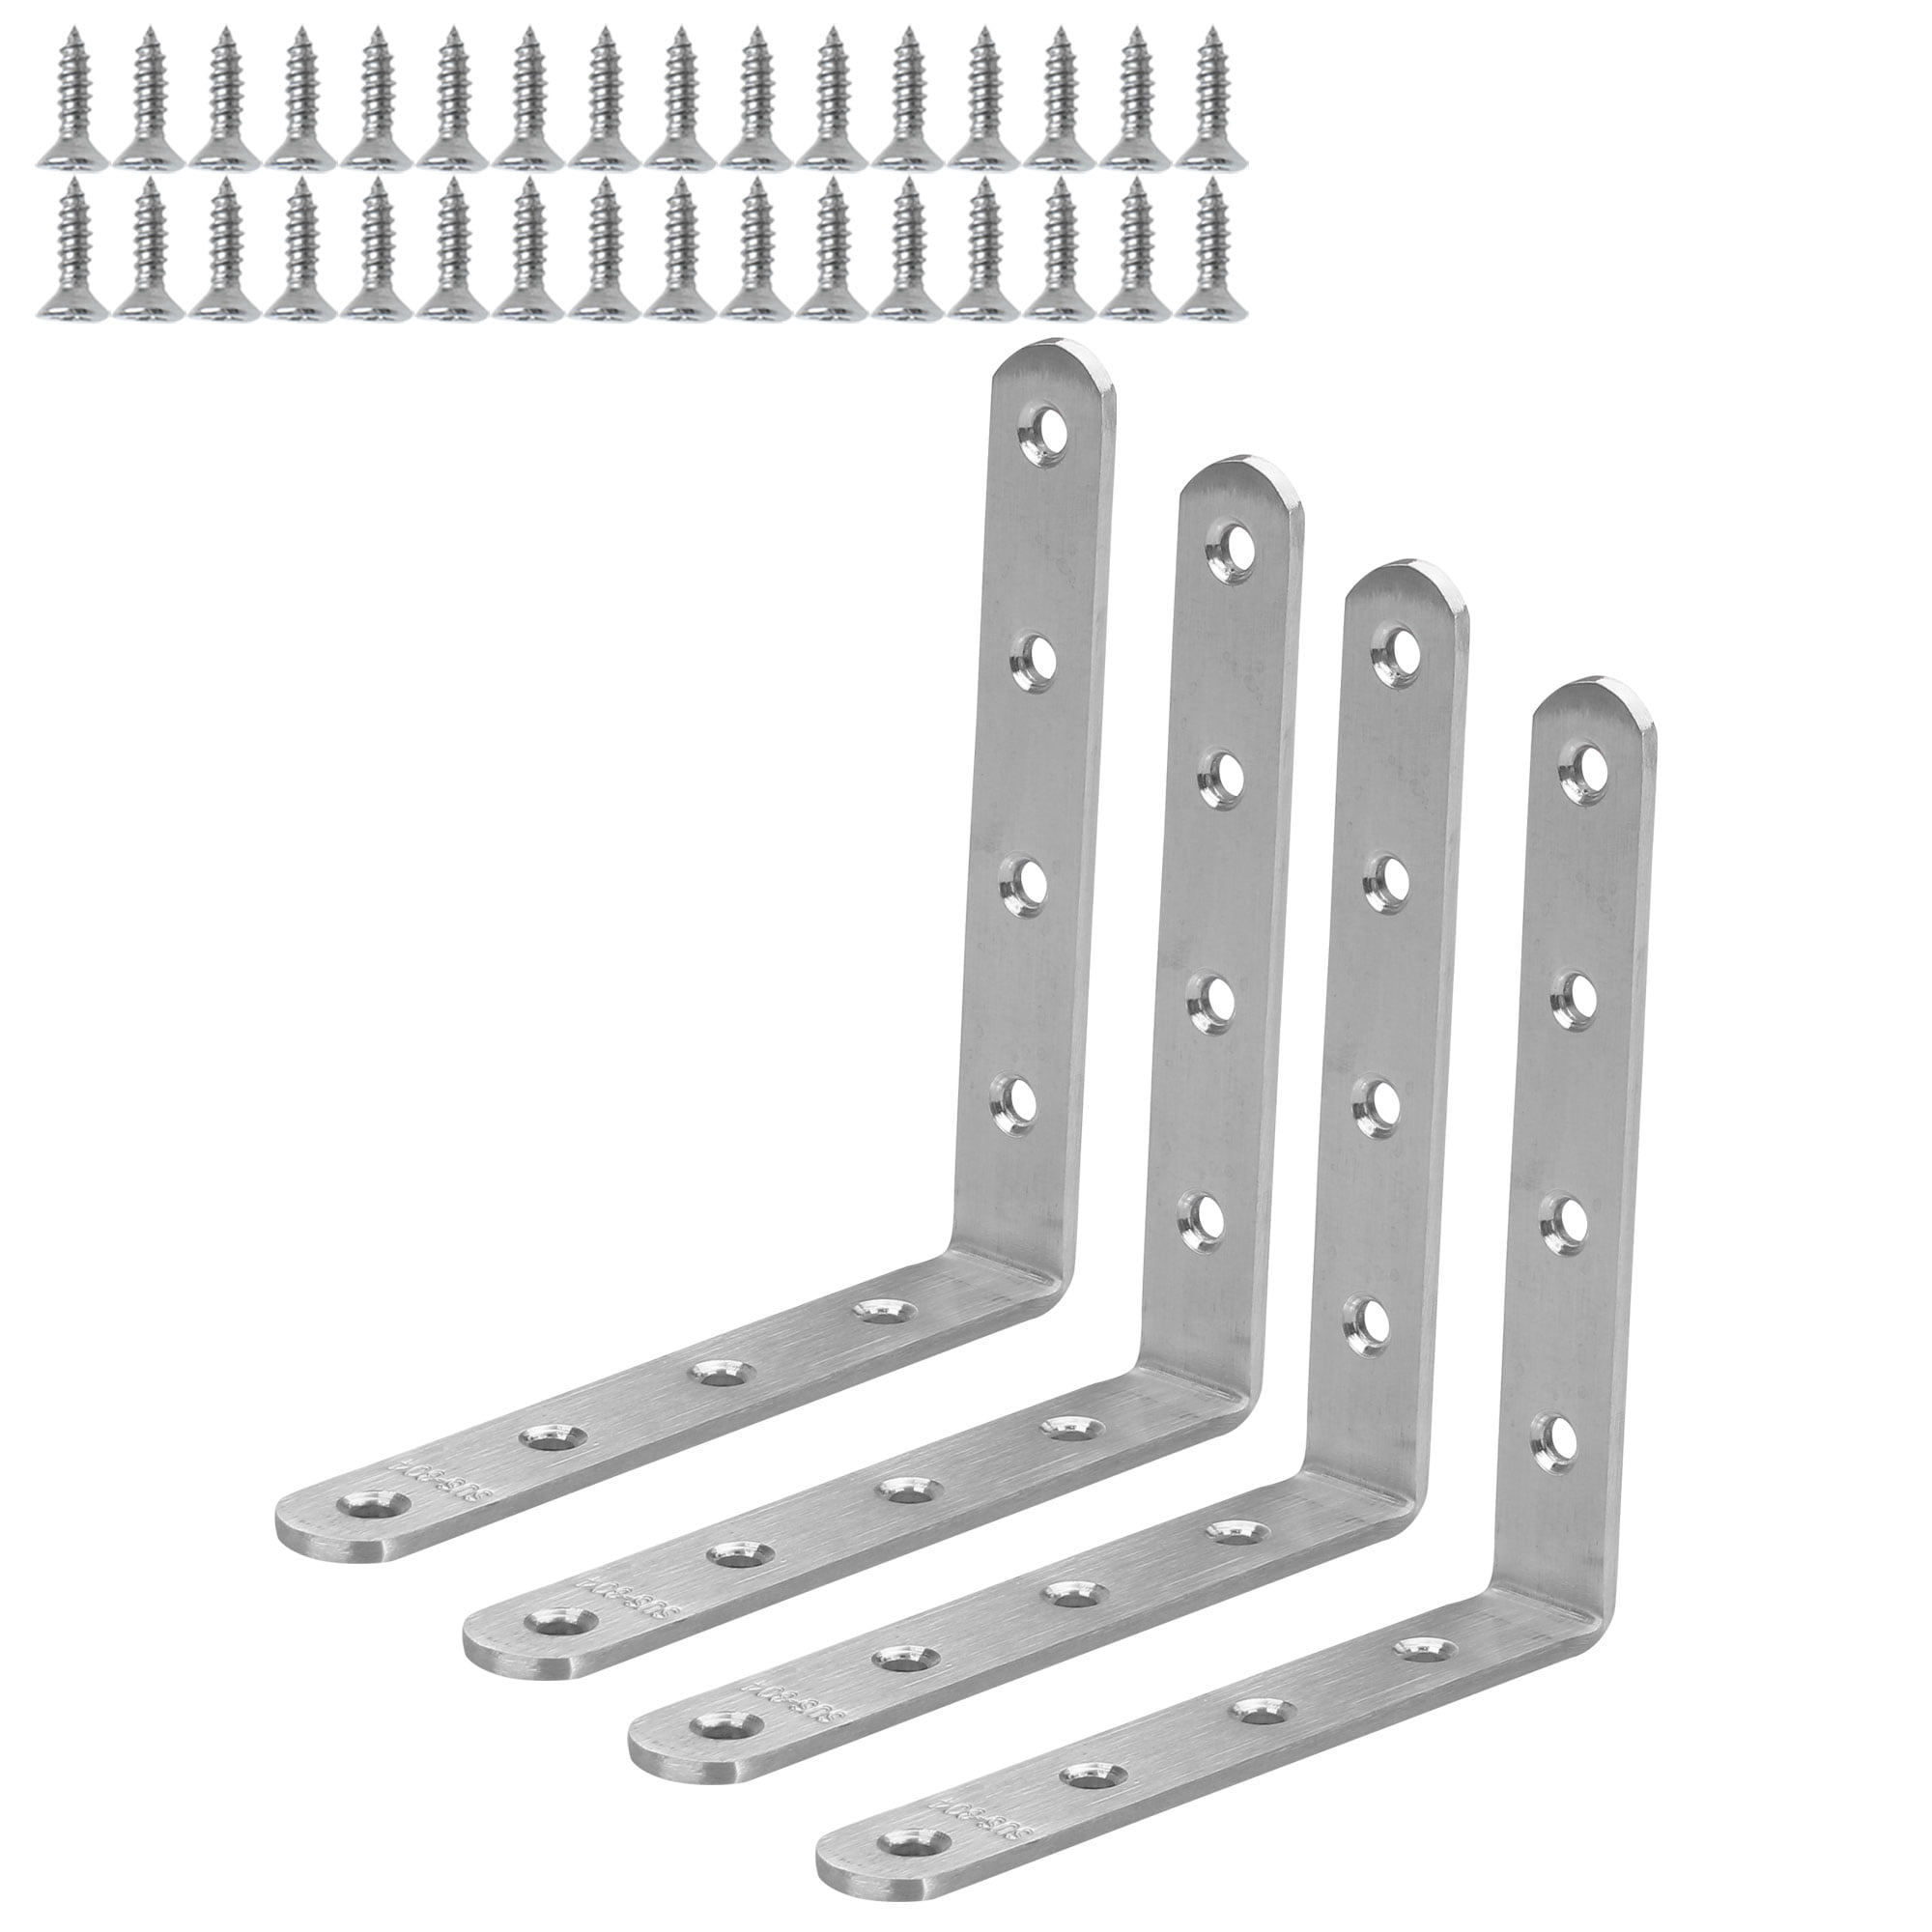 Uxcell 125x125mm Stainless Steel L Shaped Angle Brackets with Screws ...